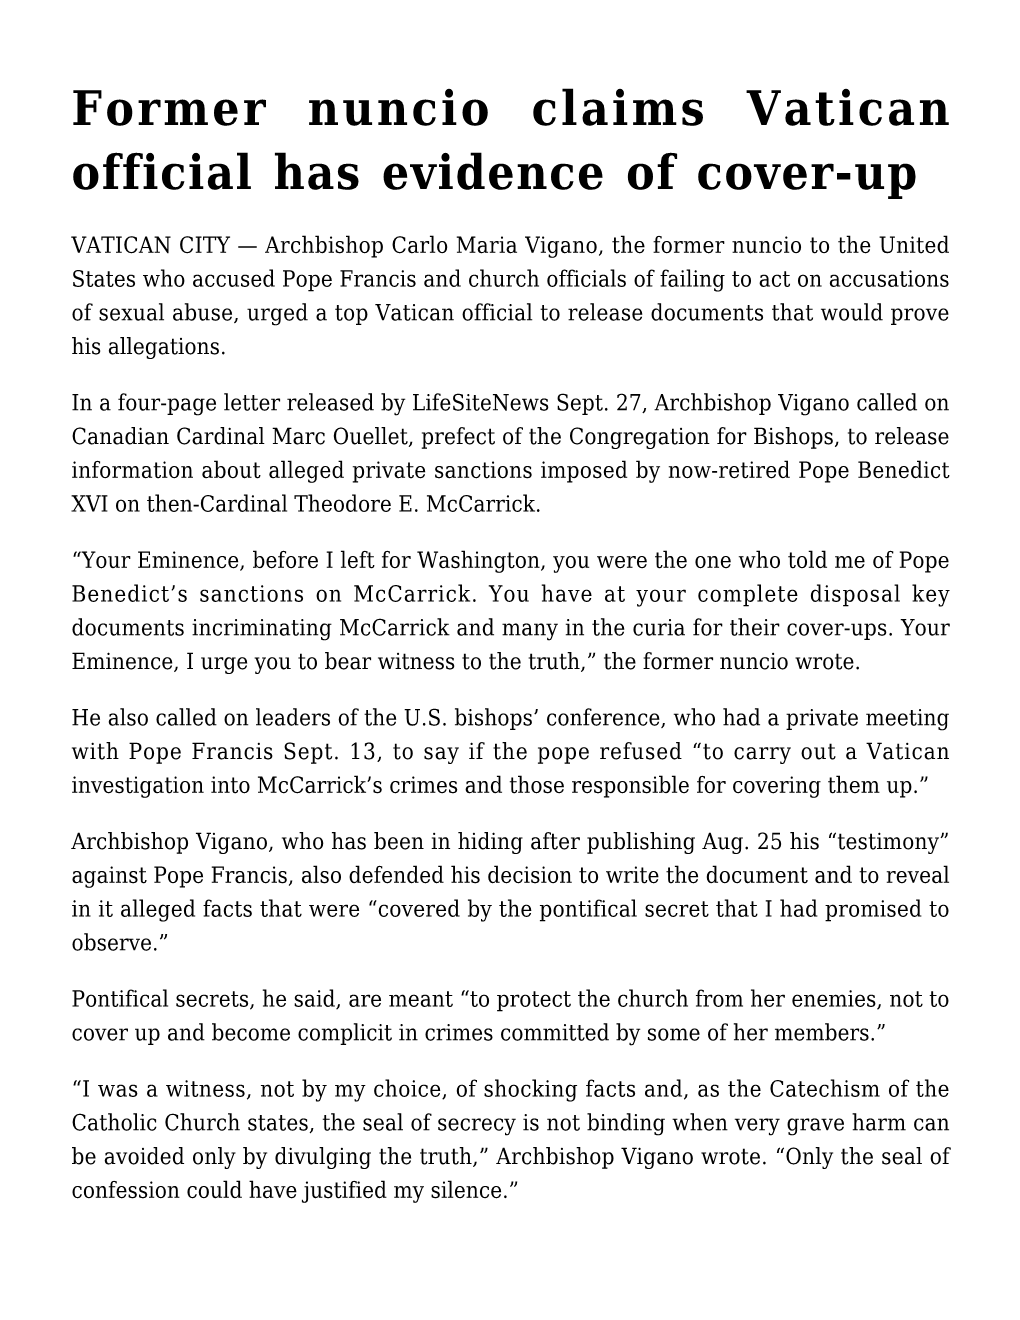 Former Nuncio Claims Vatican Official Has Evidence of Cover-Up